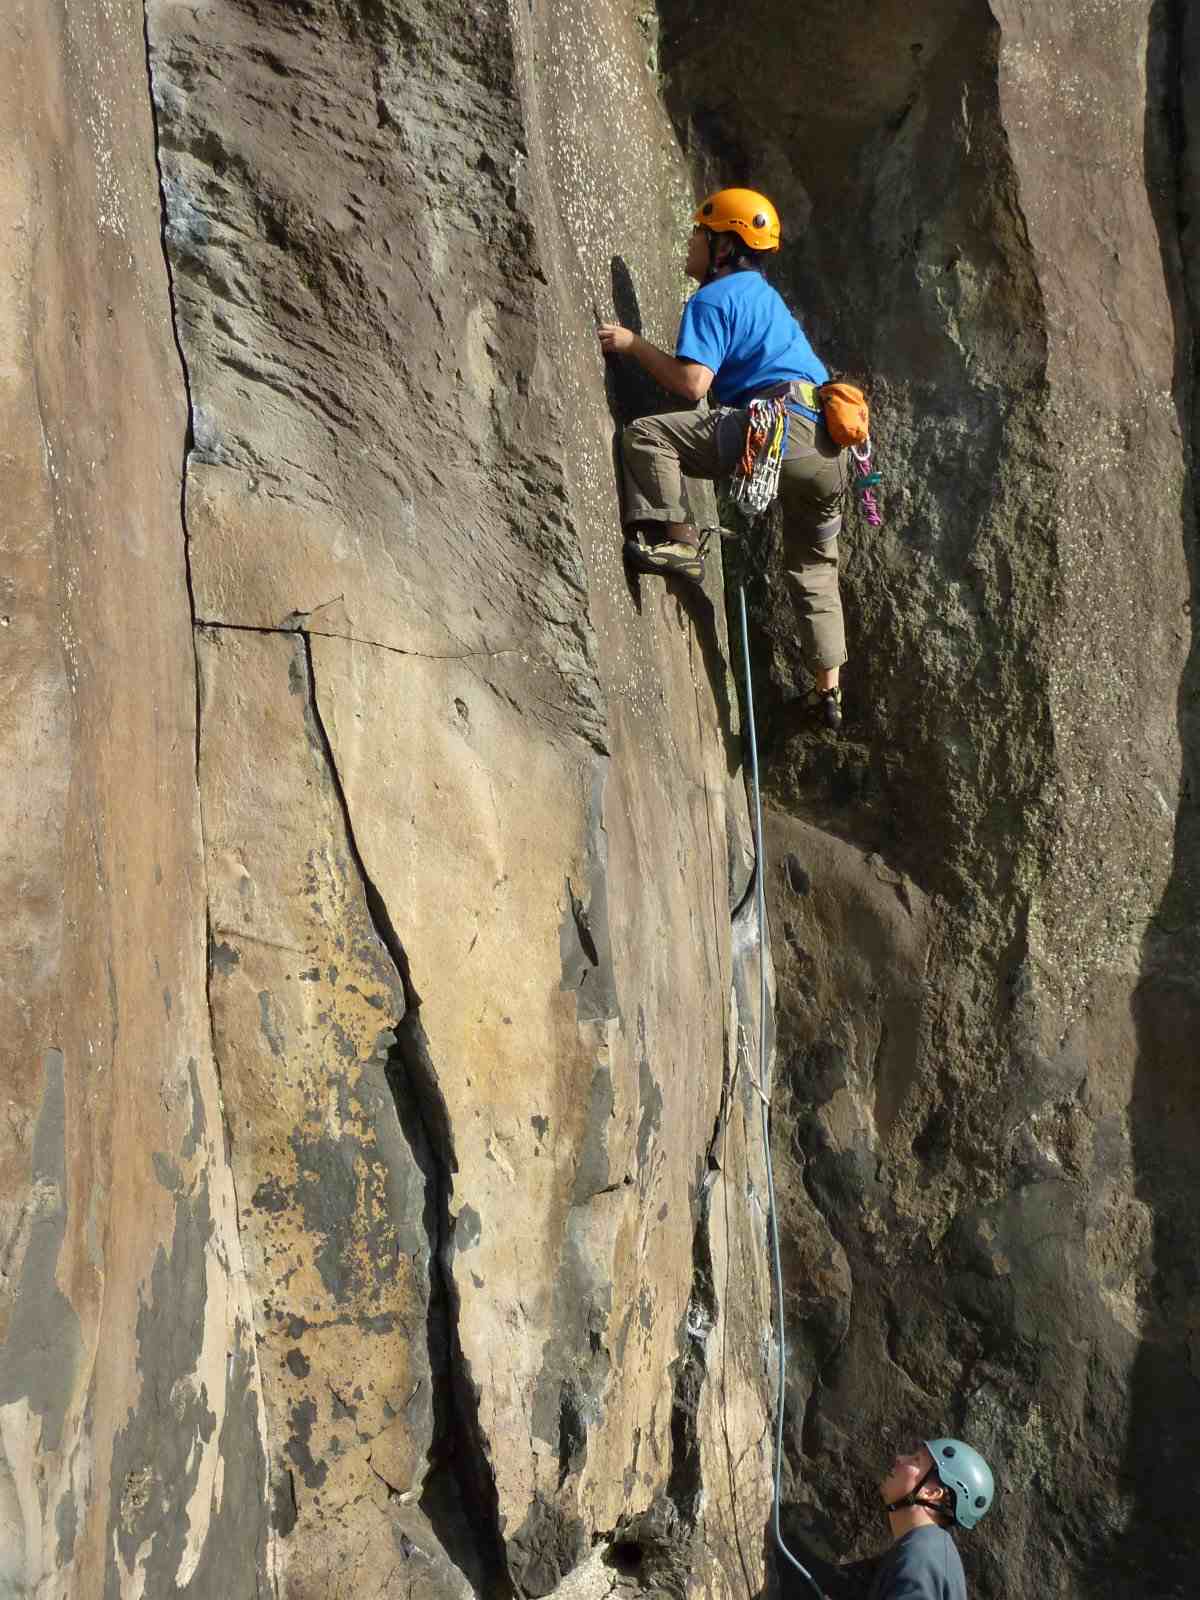 Climber in blue shirt and orange helmet on warm-colored rock corner with belayer looking up.